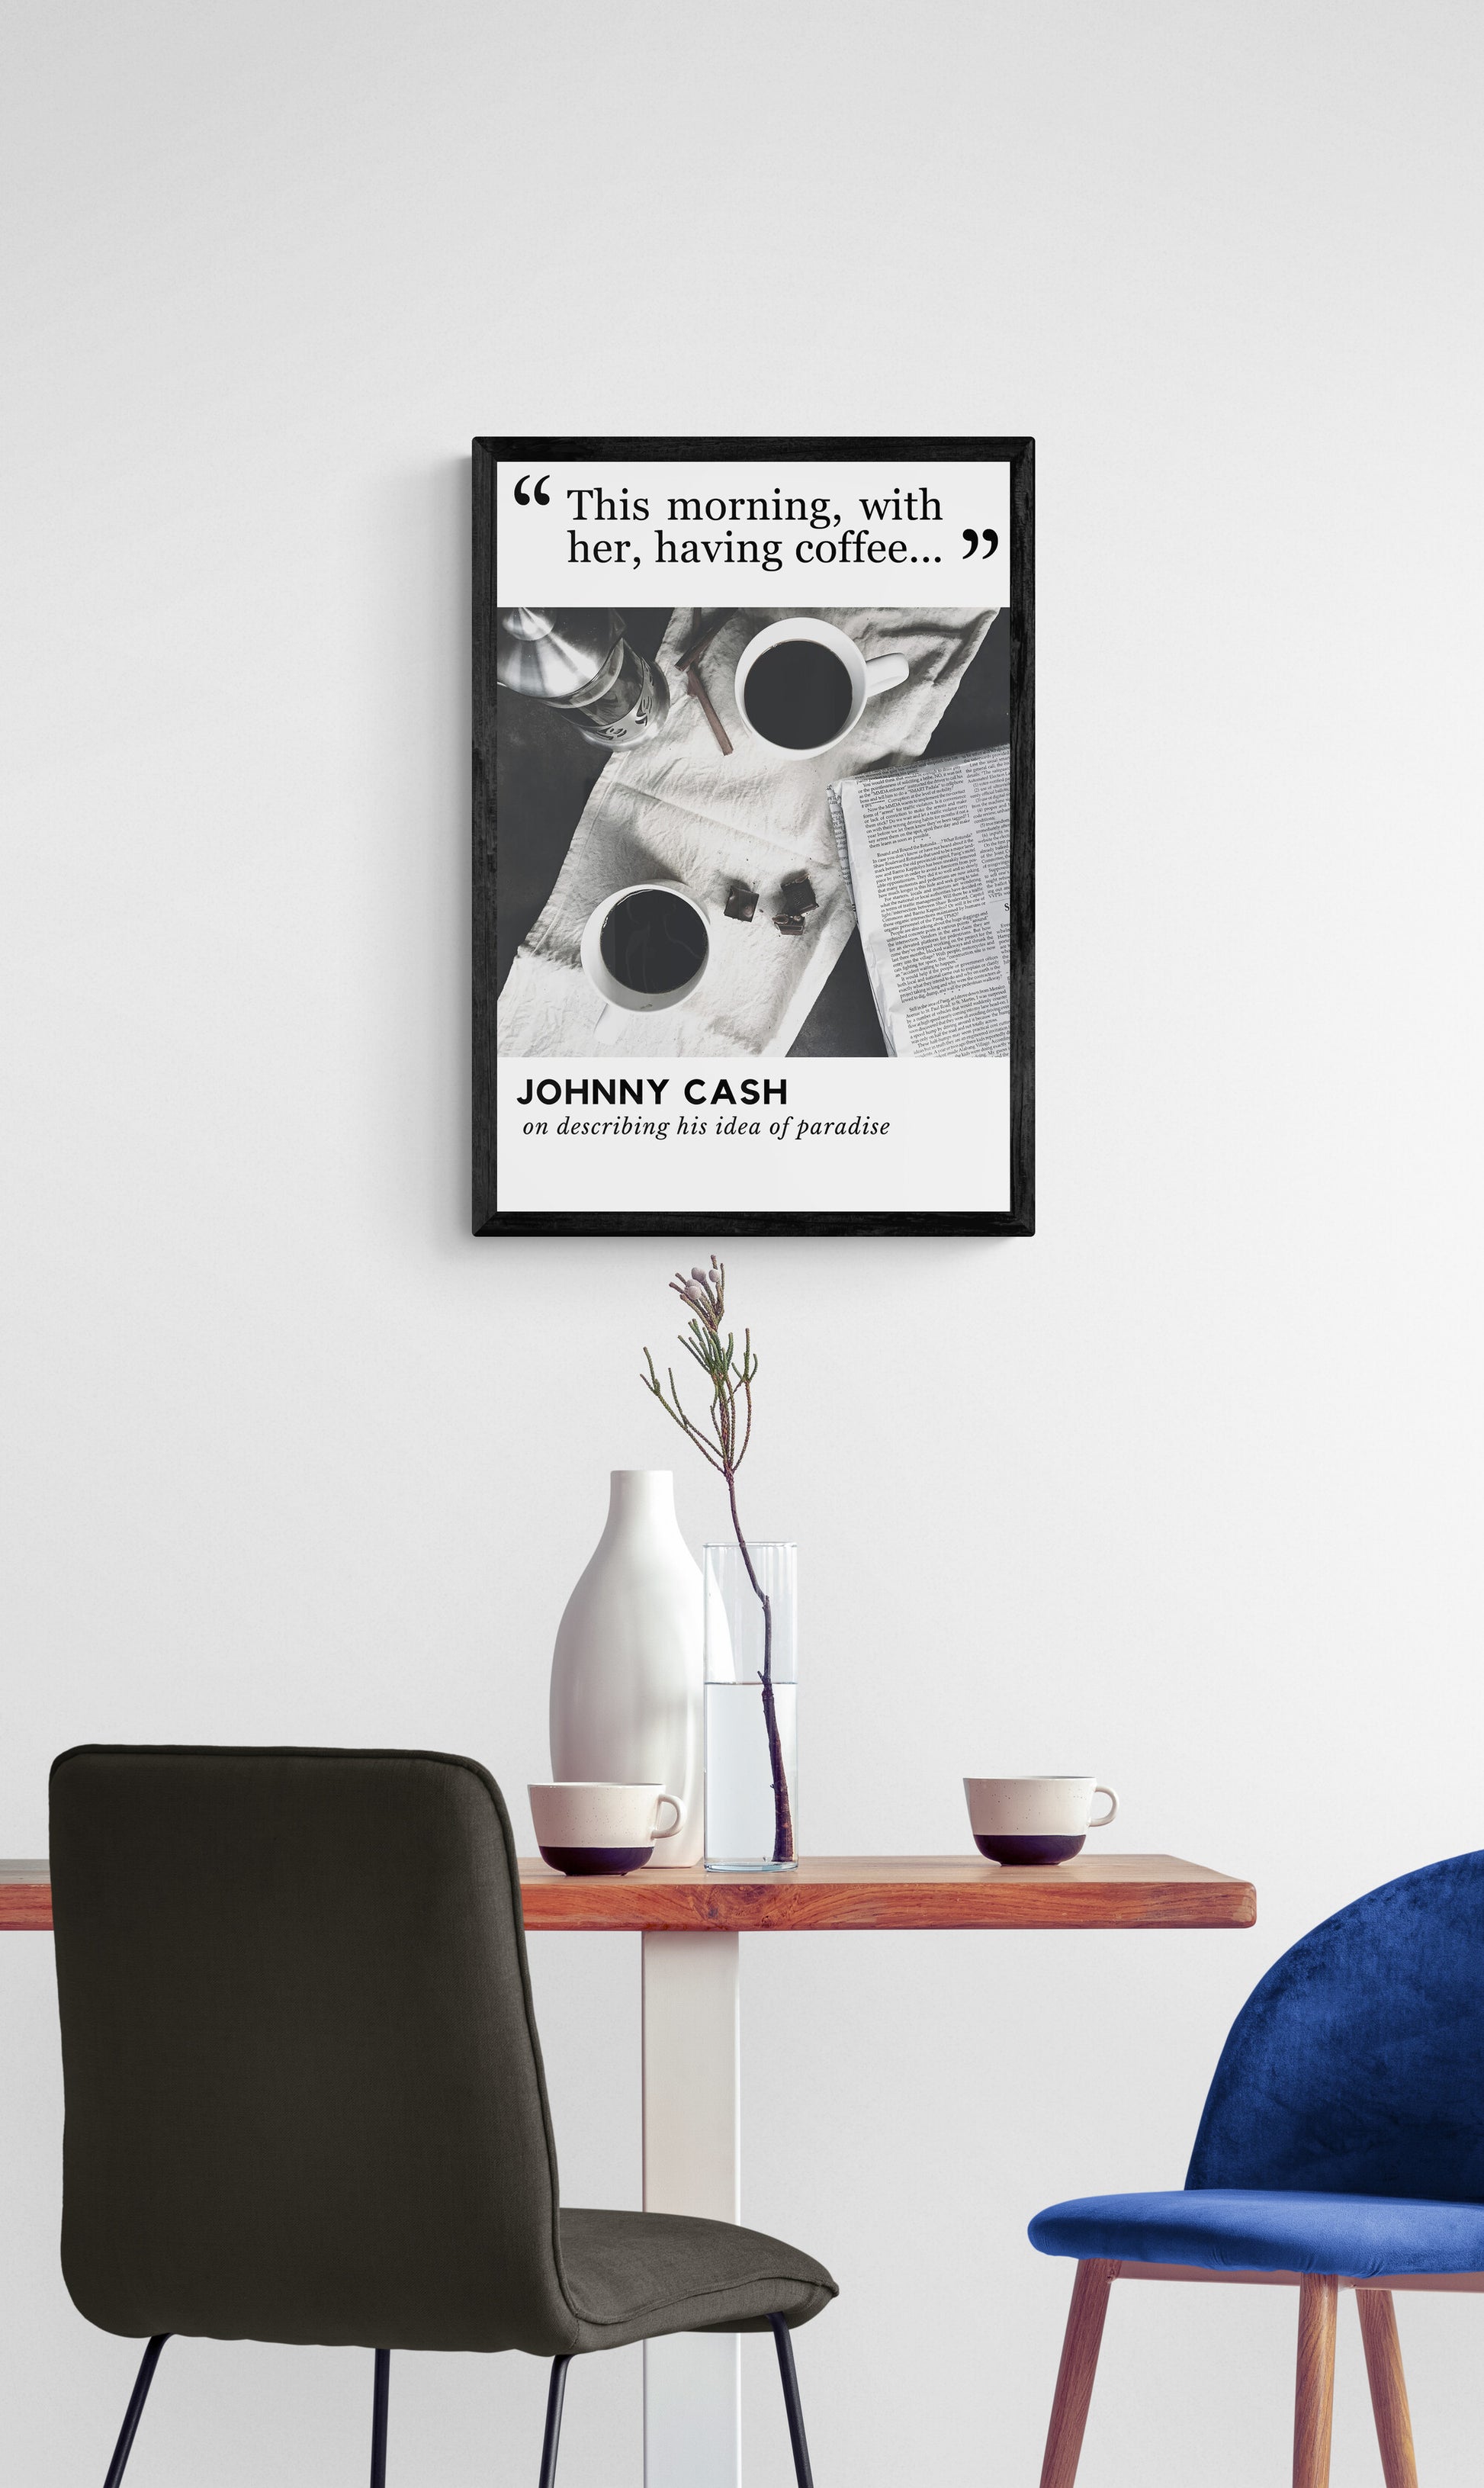 This morning, with her, having coffee - Johnny Cash on his idea of paradise referring to his wife, June Carter Cash. Modern, minimal black and white art print that fits perfectly in a coffee nook or kitchen space.